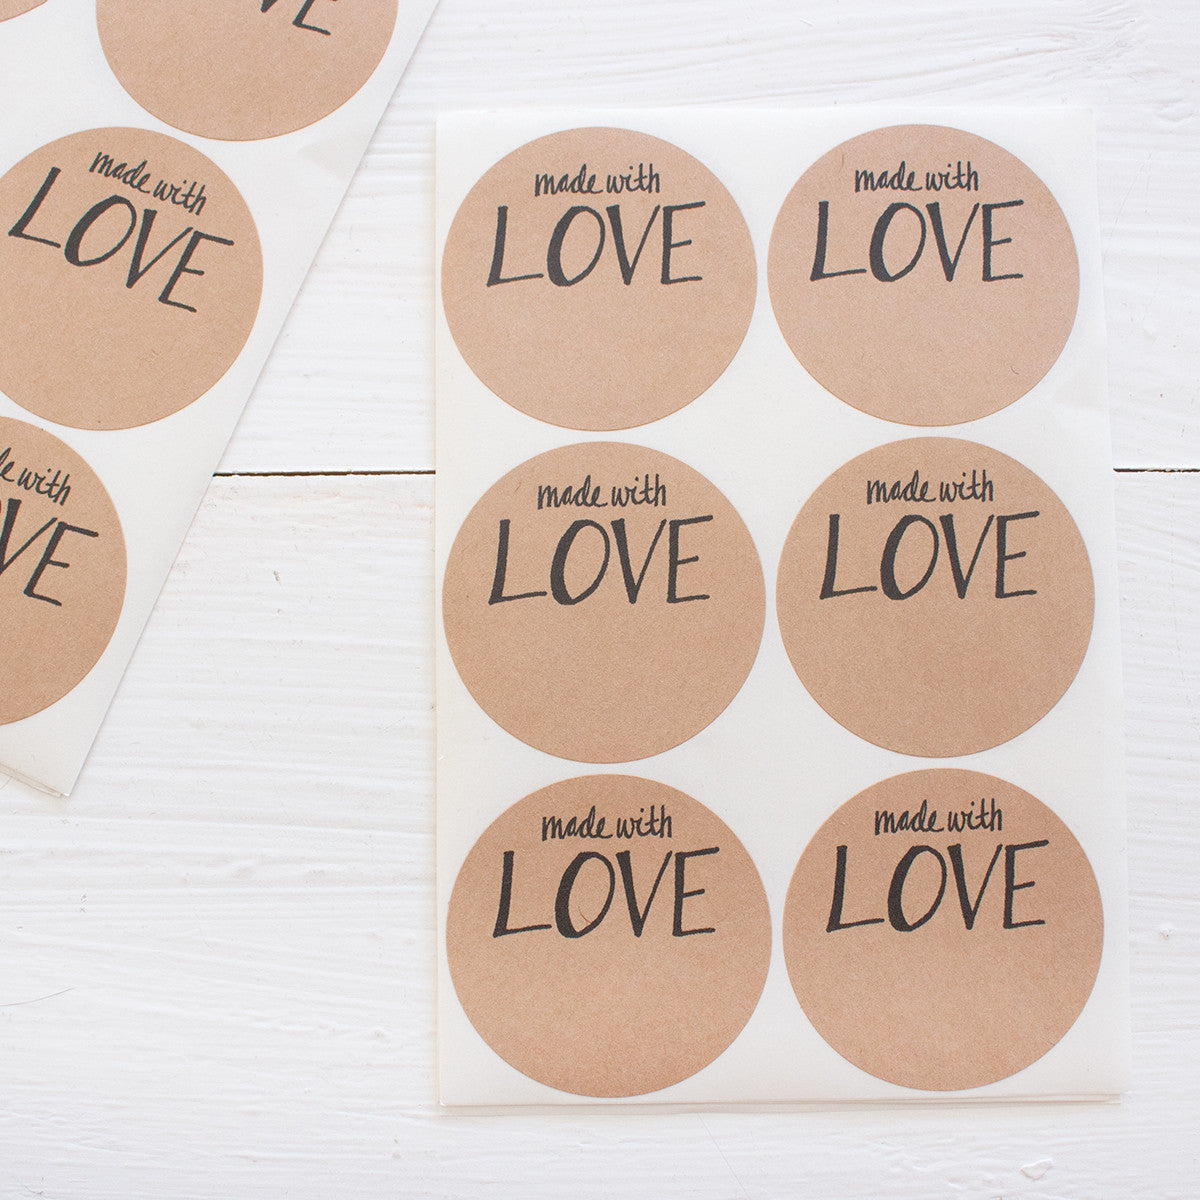 2 inch circle stickers - made with love